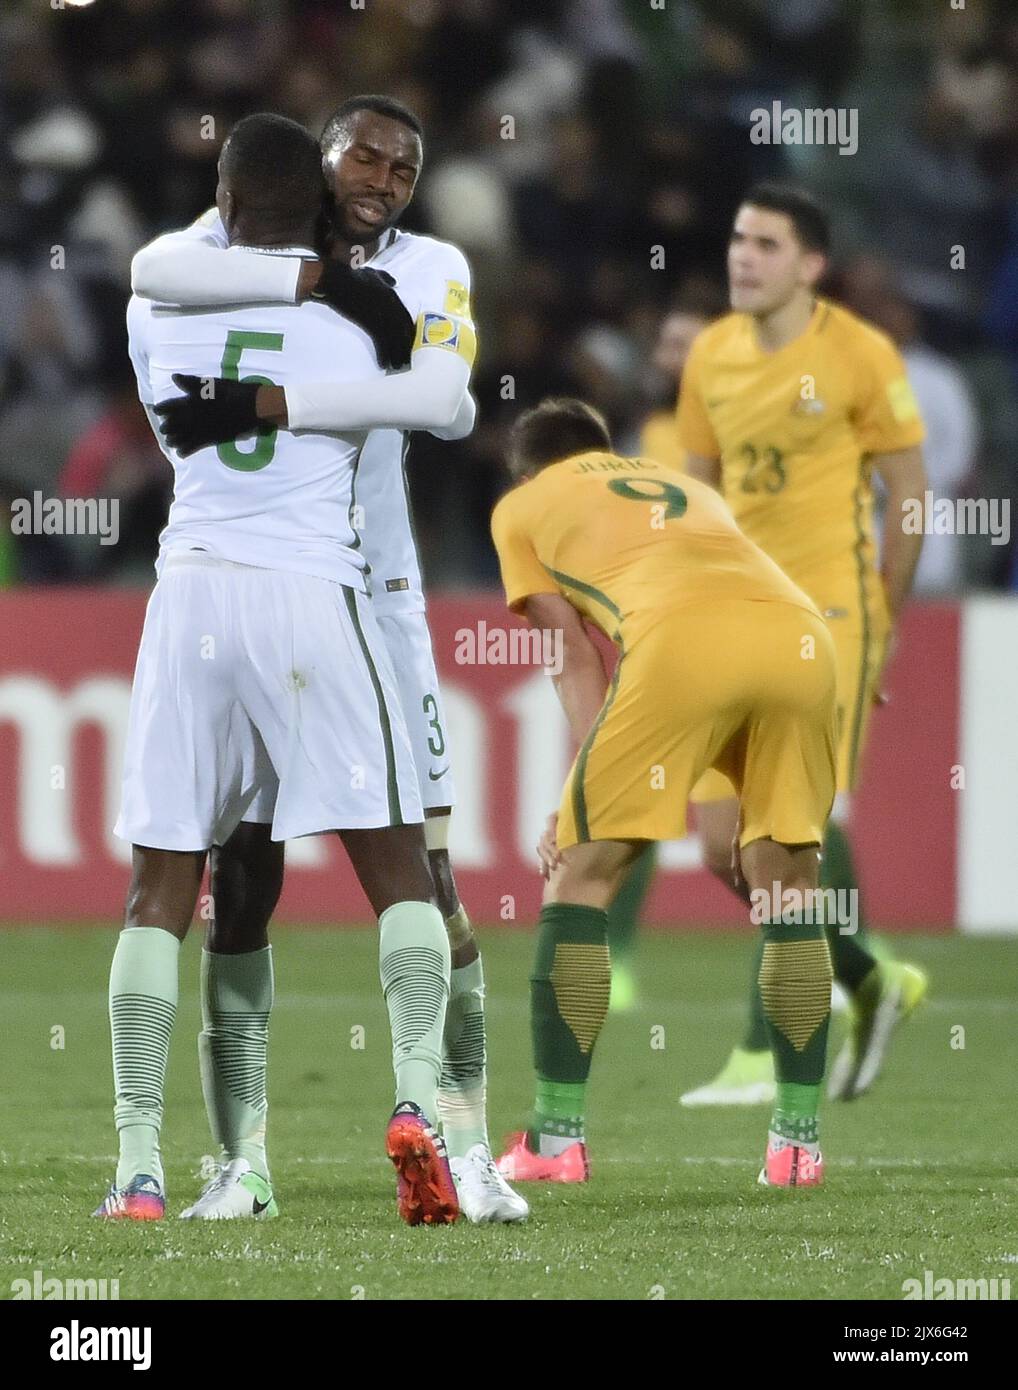 Omar Ibrahim othman and Osama Hawsawi from Saudi Arabia celebrate after scoring second goal during the 2018 FIFA World Cup Asian Qualifier match between Australia and Saudi Arabia at the Adelaide Oval in Adelaide, Thursday, June 8, 2017. (AAP Image/David Mariuz) Stock Photo